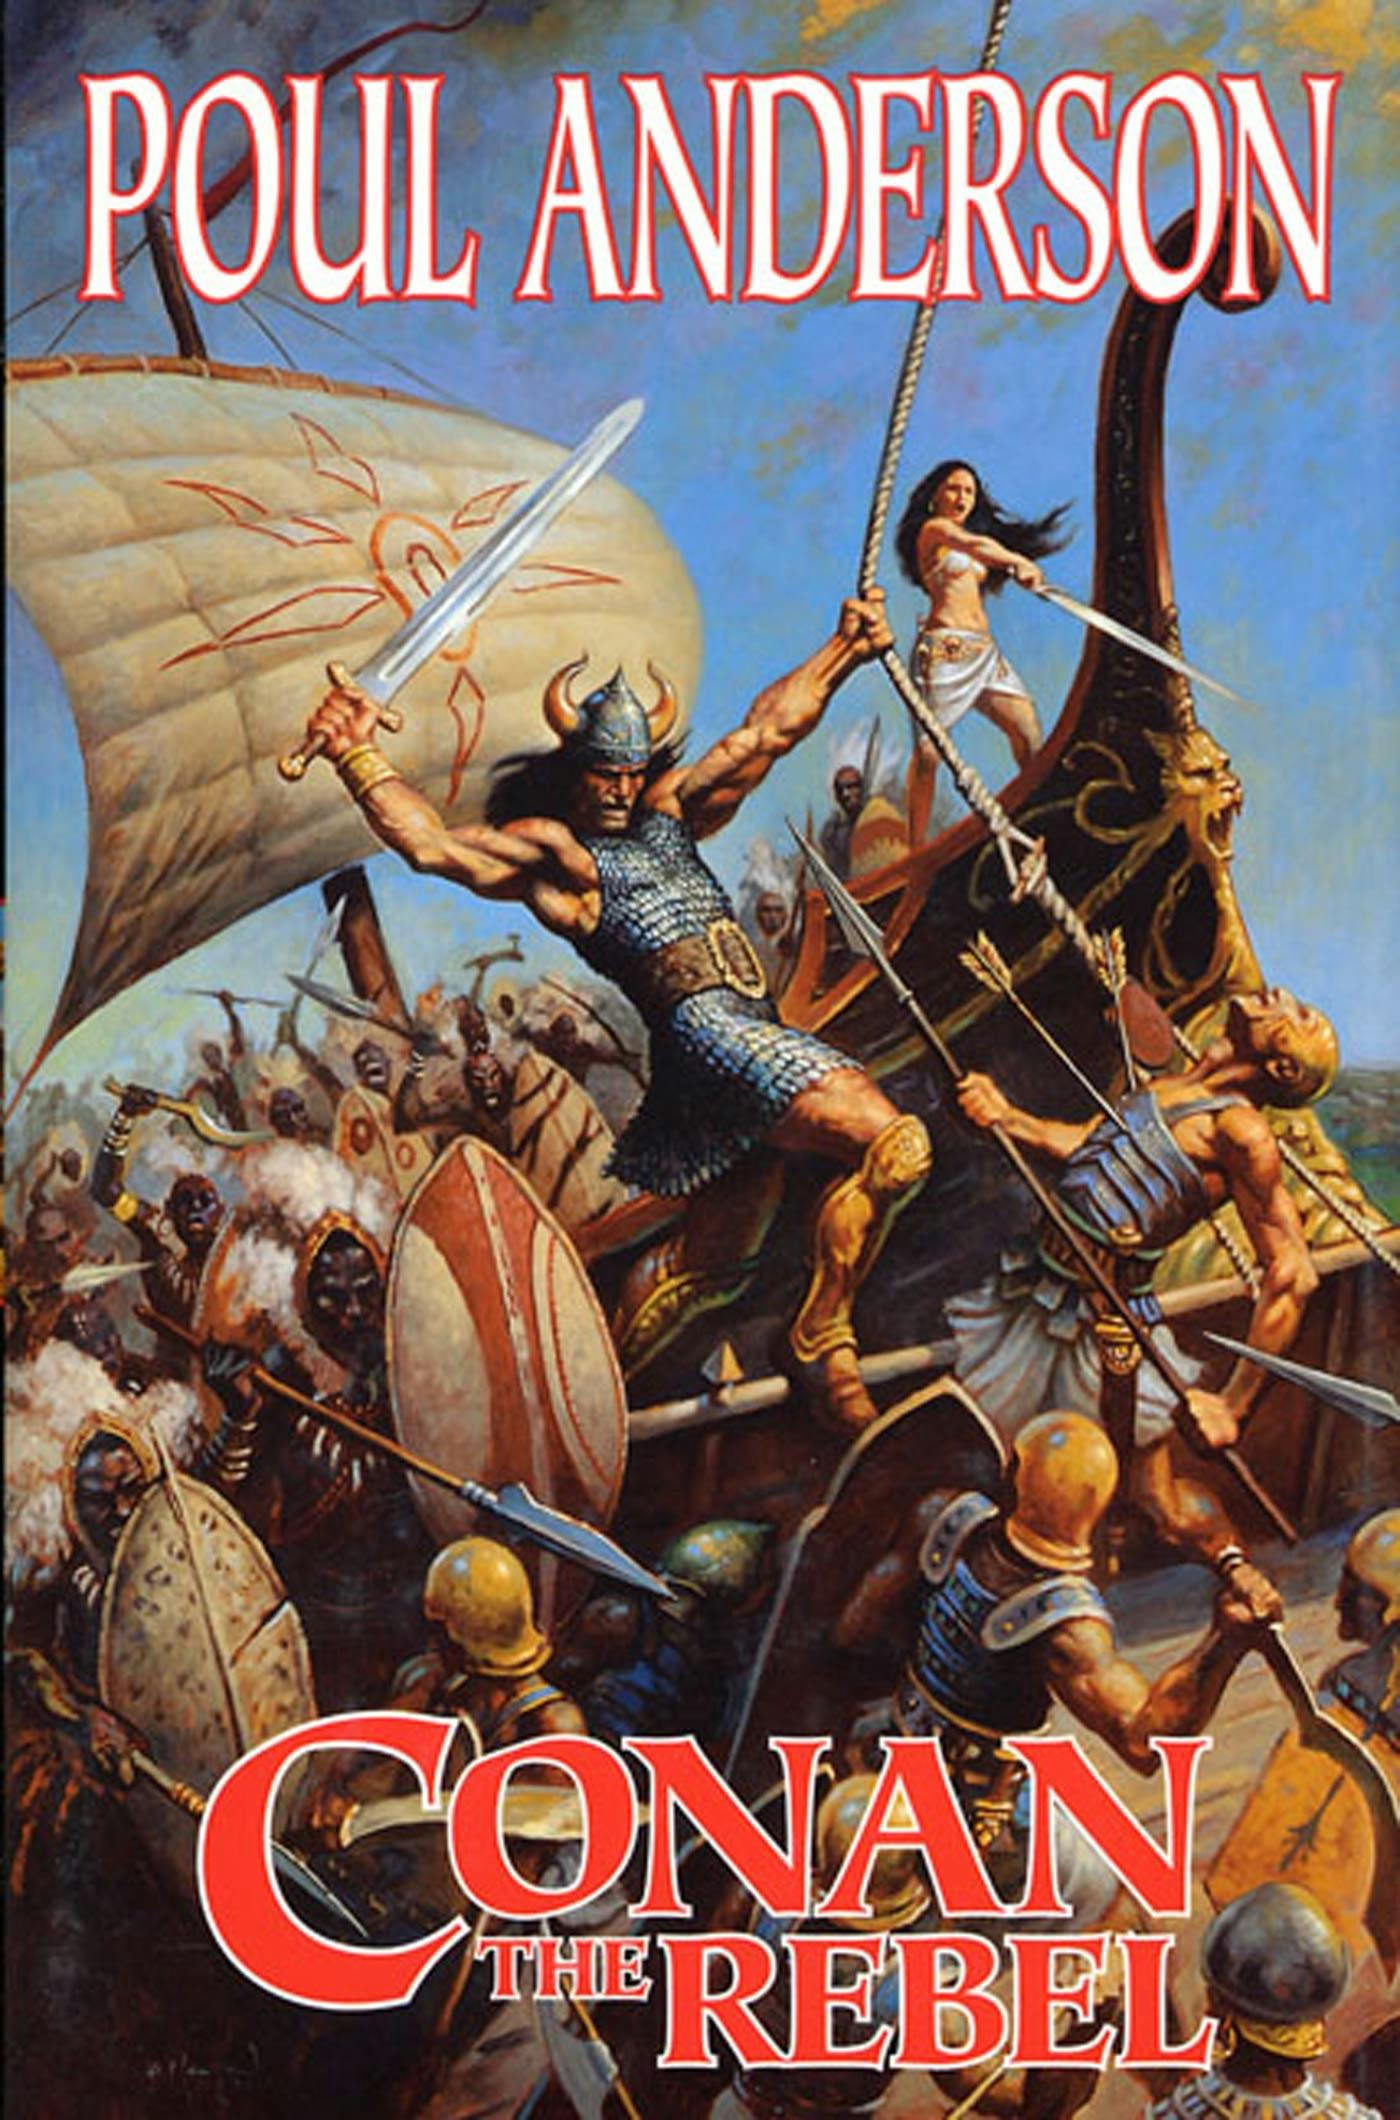 Cover for the book titled as: Conan The Rebel